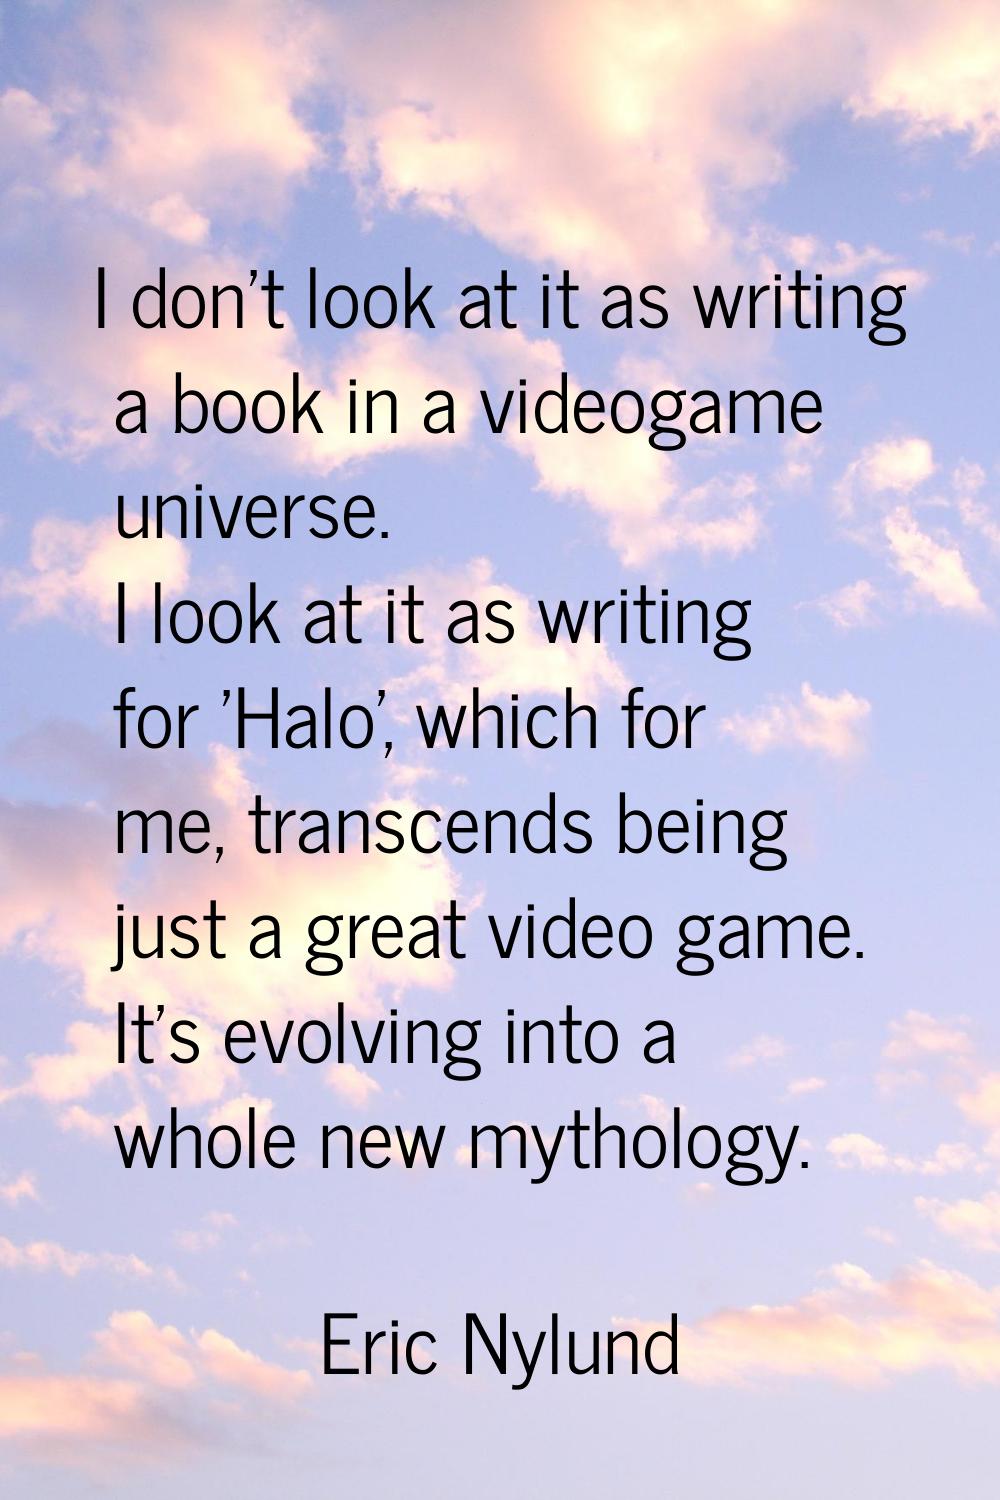 I don't look at it as writing a book in a videogame universe. I look at it as writing for 'Halo', w